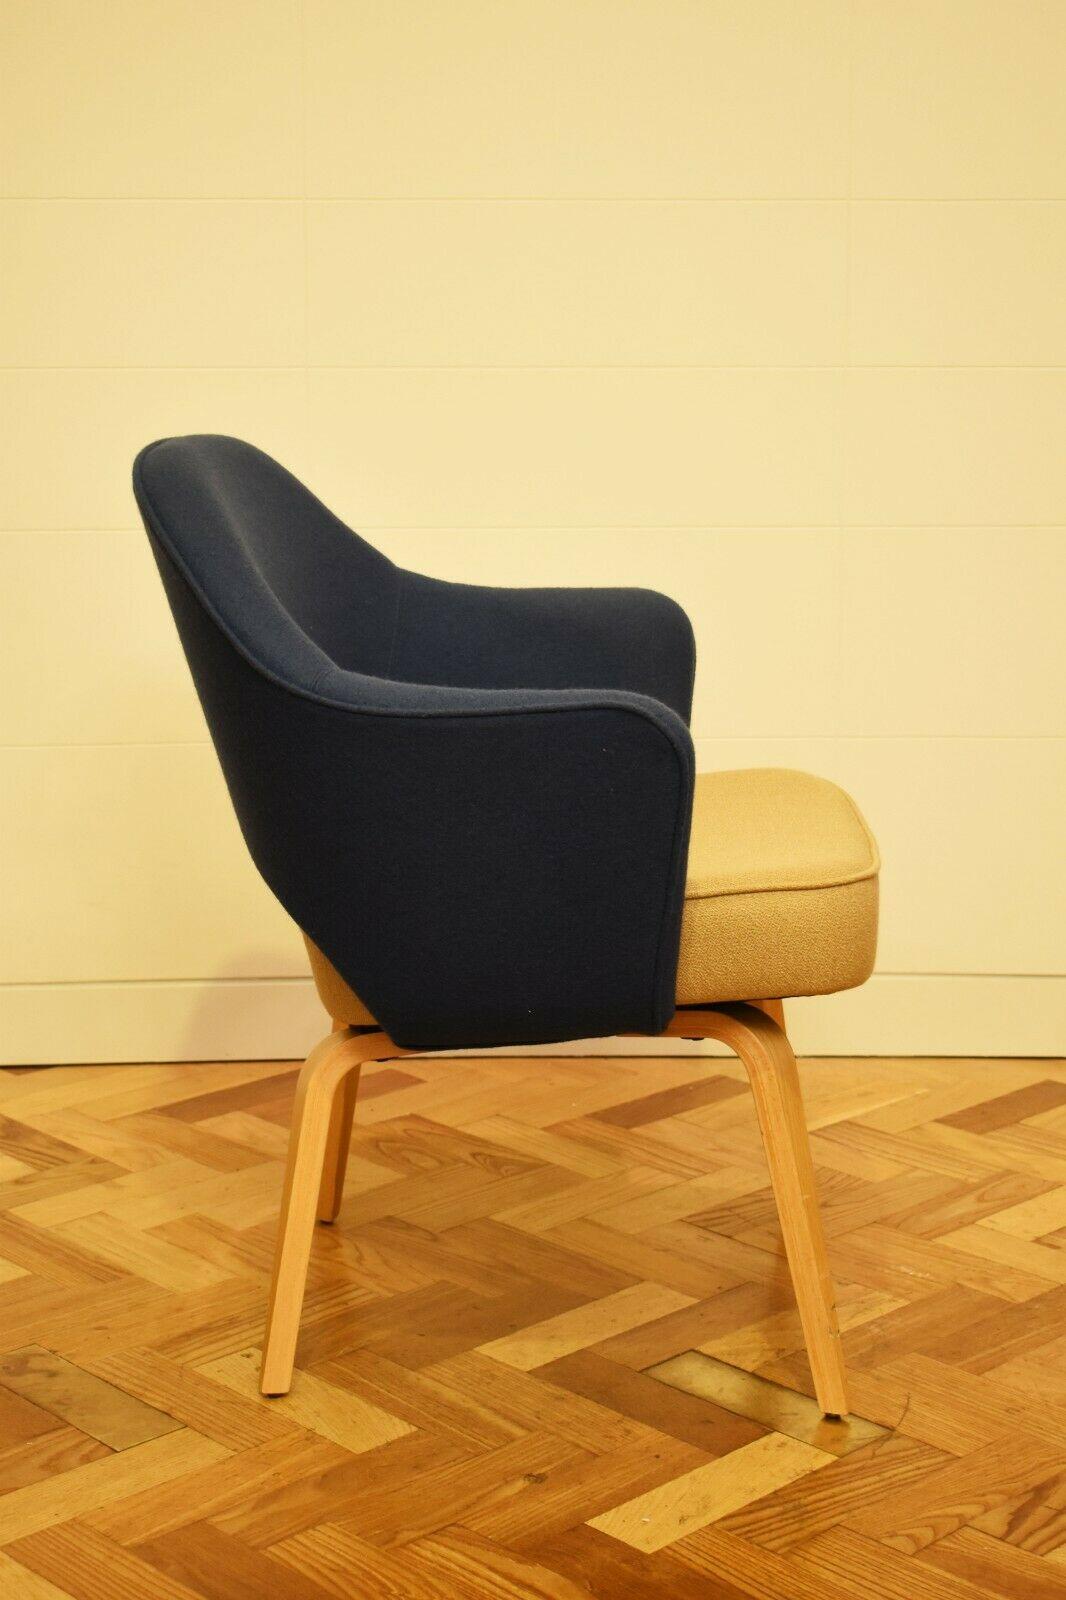 Central American Eero Saarinen Conference Chair in Navy and Bei